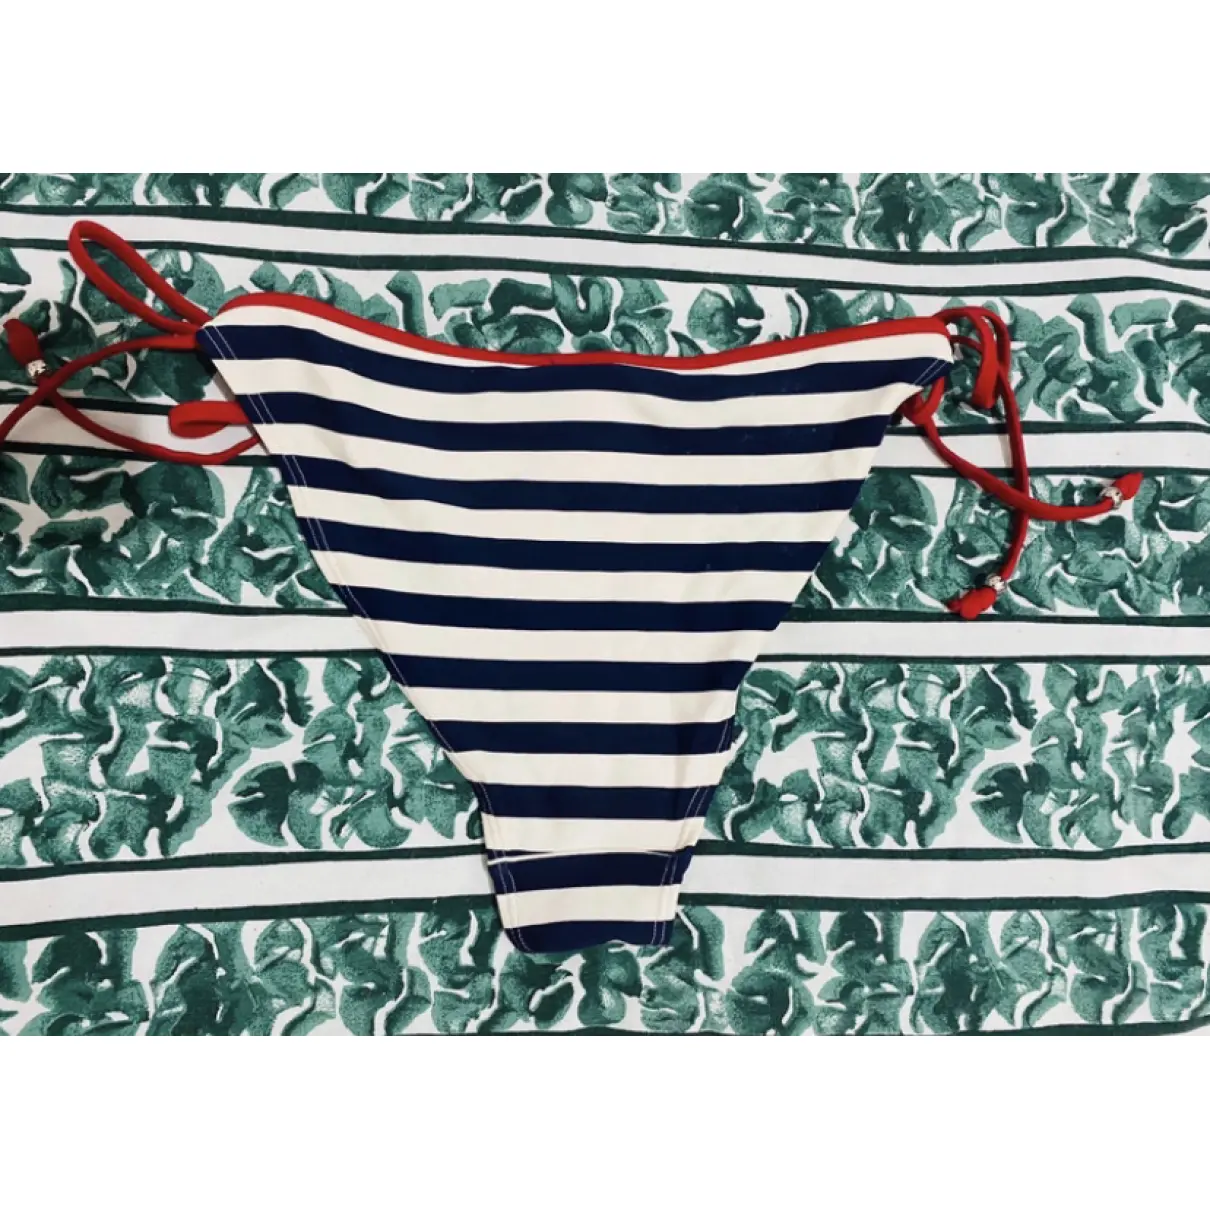 Buy Tommy Hilfiger Two-piece swimsuit online